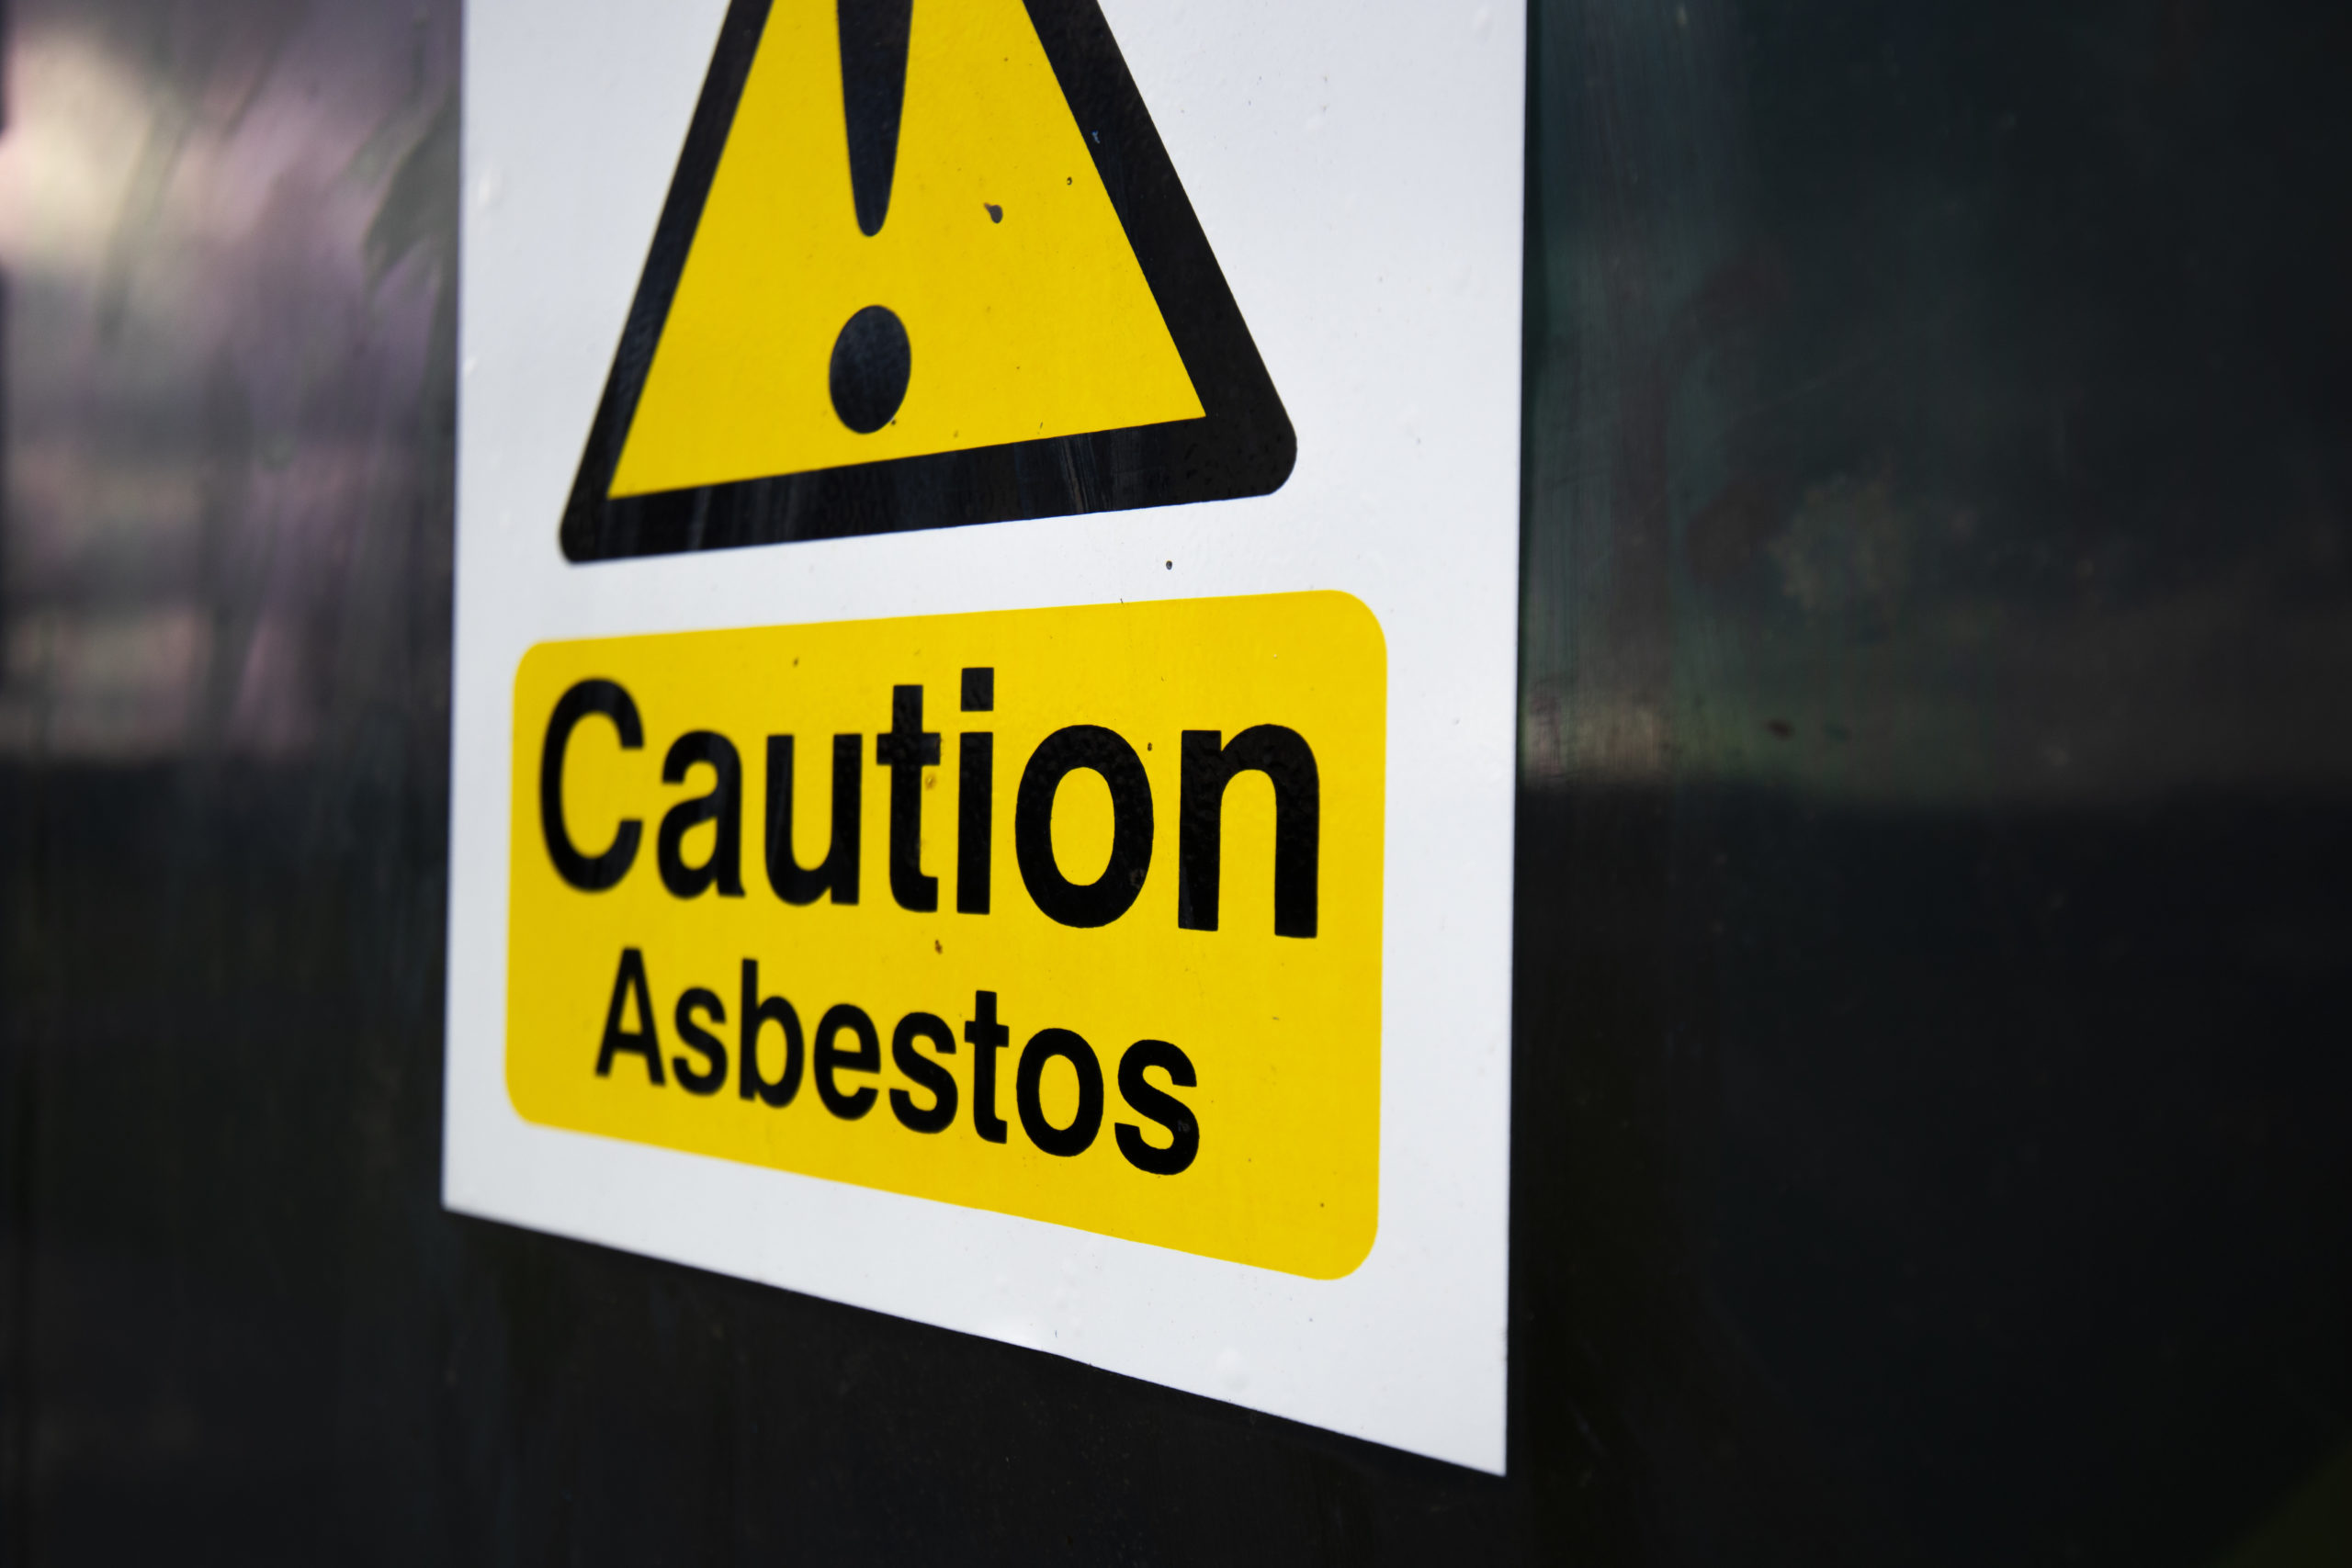 MPs Starting Investigation into Asbestos Deaths Among Teachers